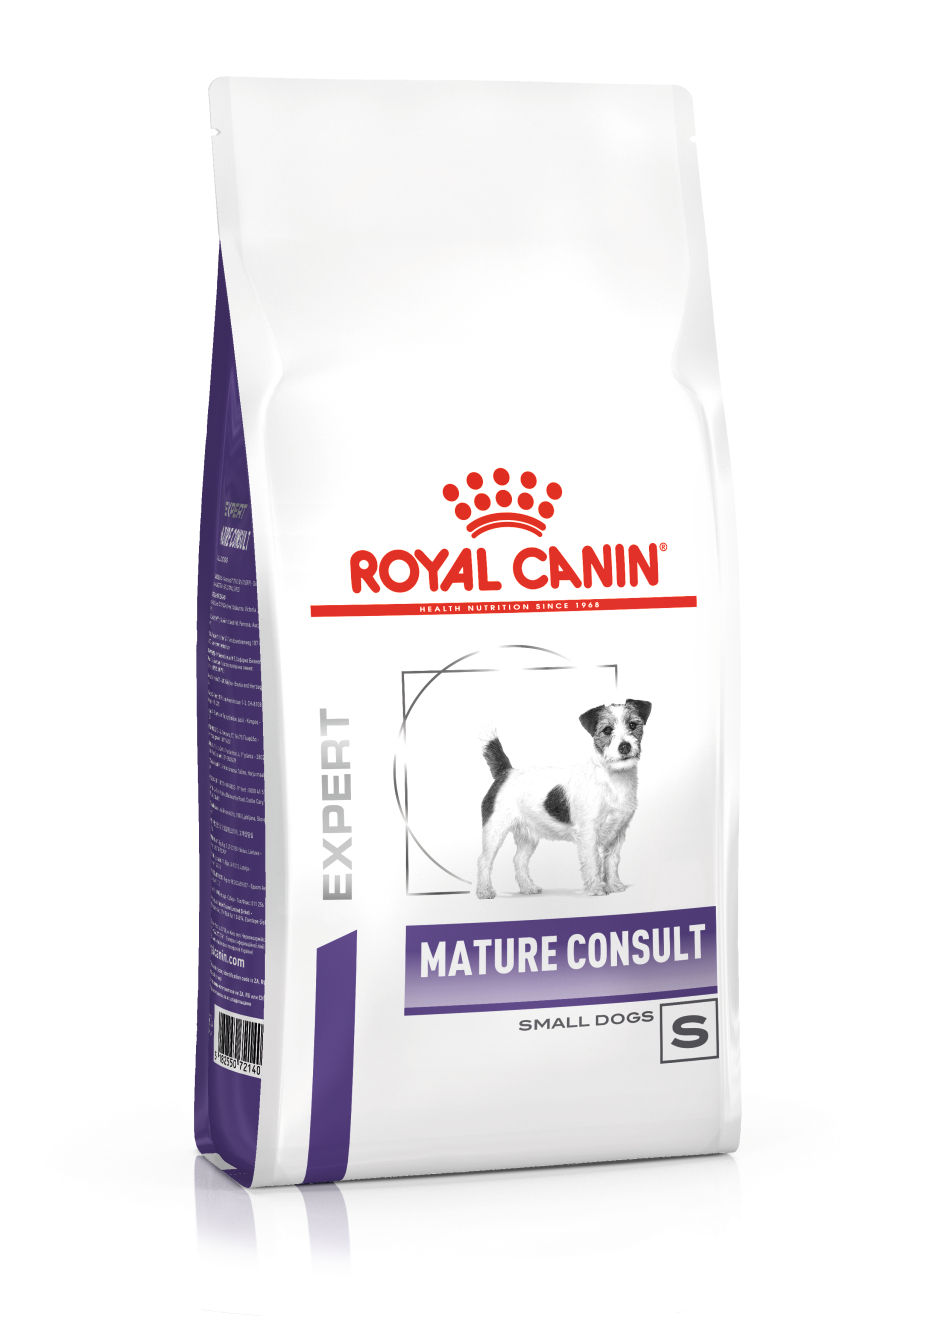 Royal Canin Expert Mature Consult Small Dogs para perros pequeños